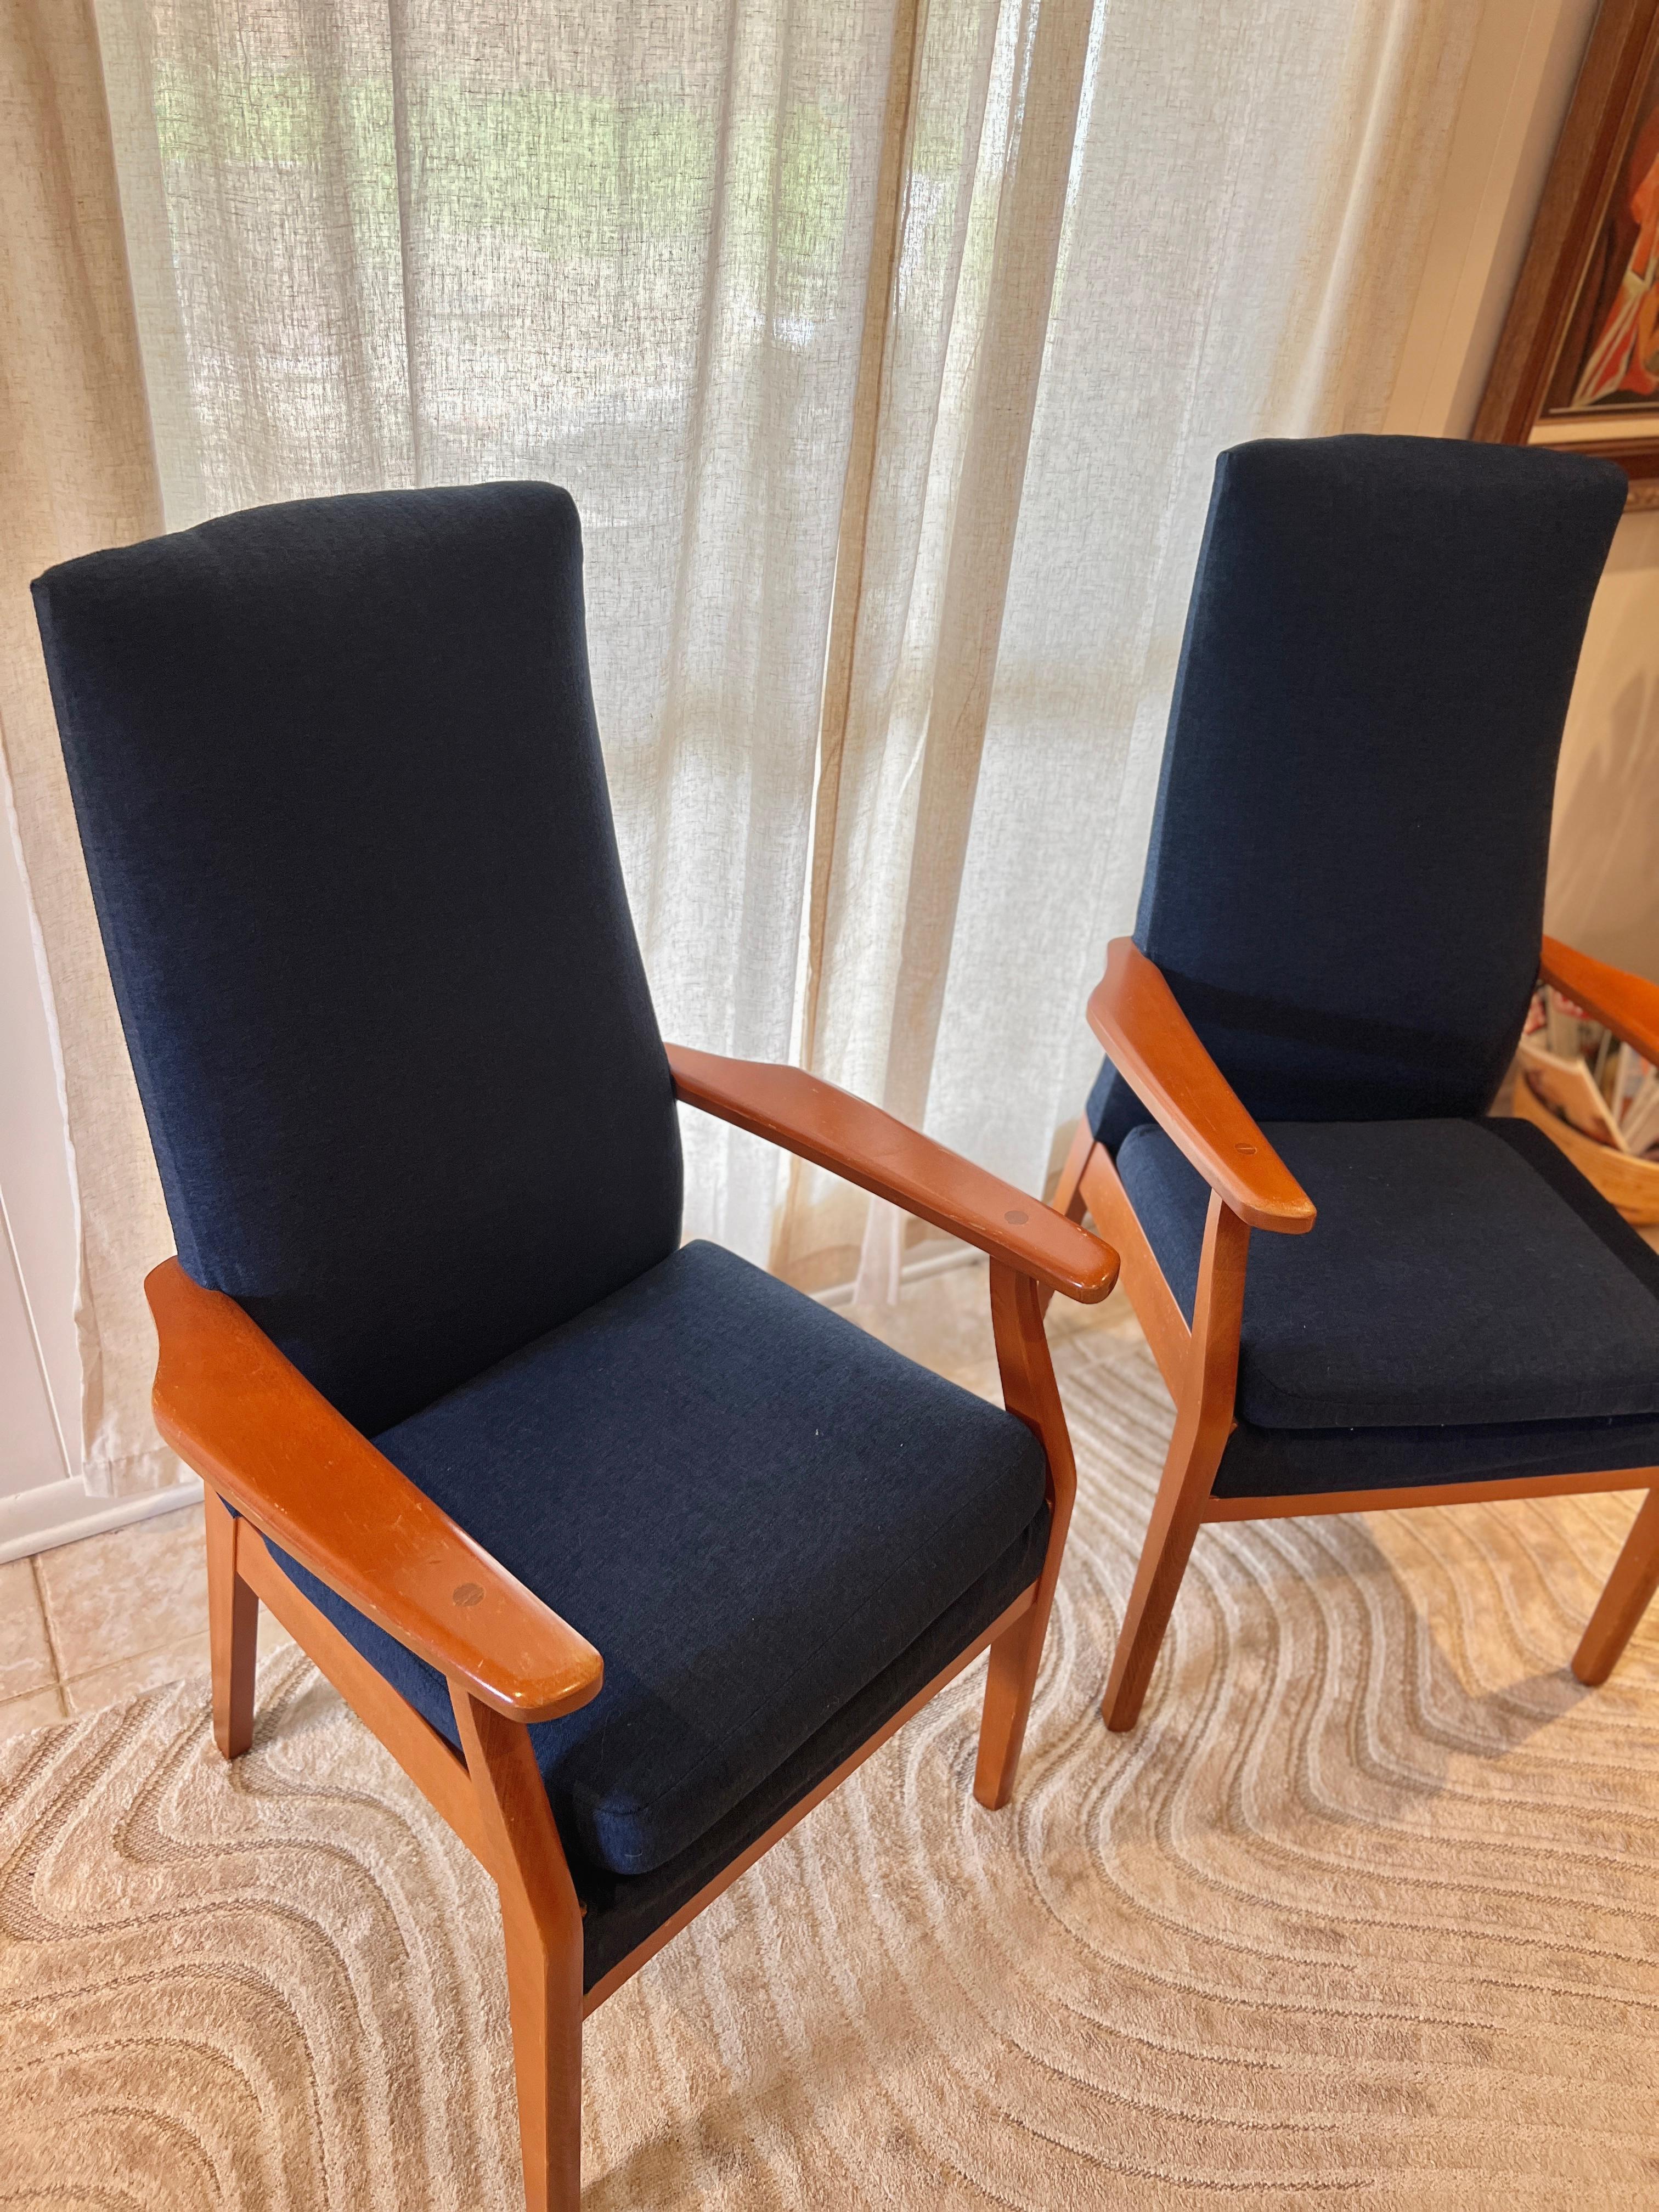 Mid-Century Modern Style High Back Chairs by Parker Knoll from 1981 For Sale 3